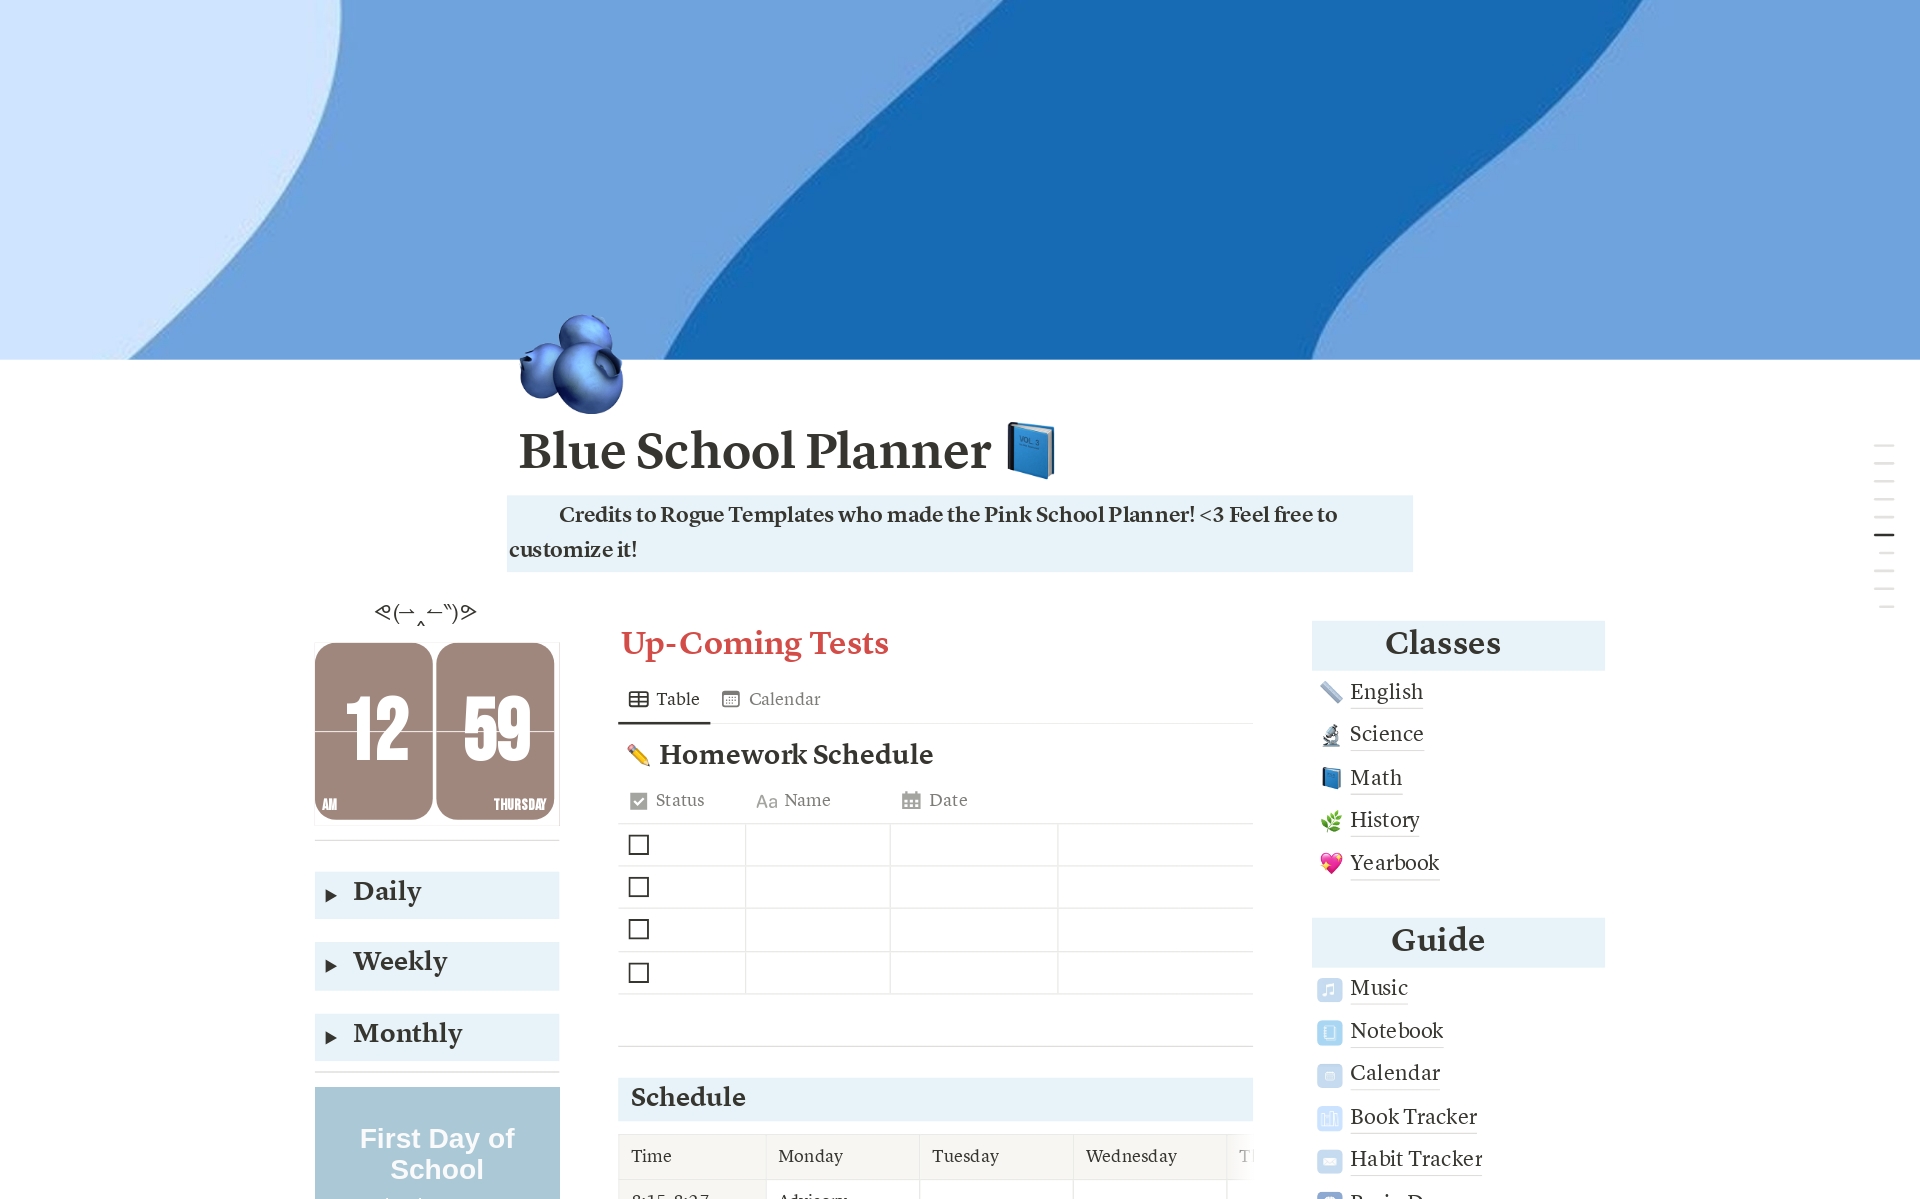 Blue school planner, credits to Rogue Templates for making this. I'm just saving people time by turning it blue for all the blue lovers! Thanks for using my template! <3